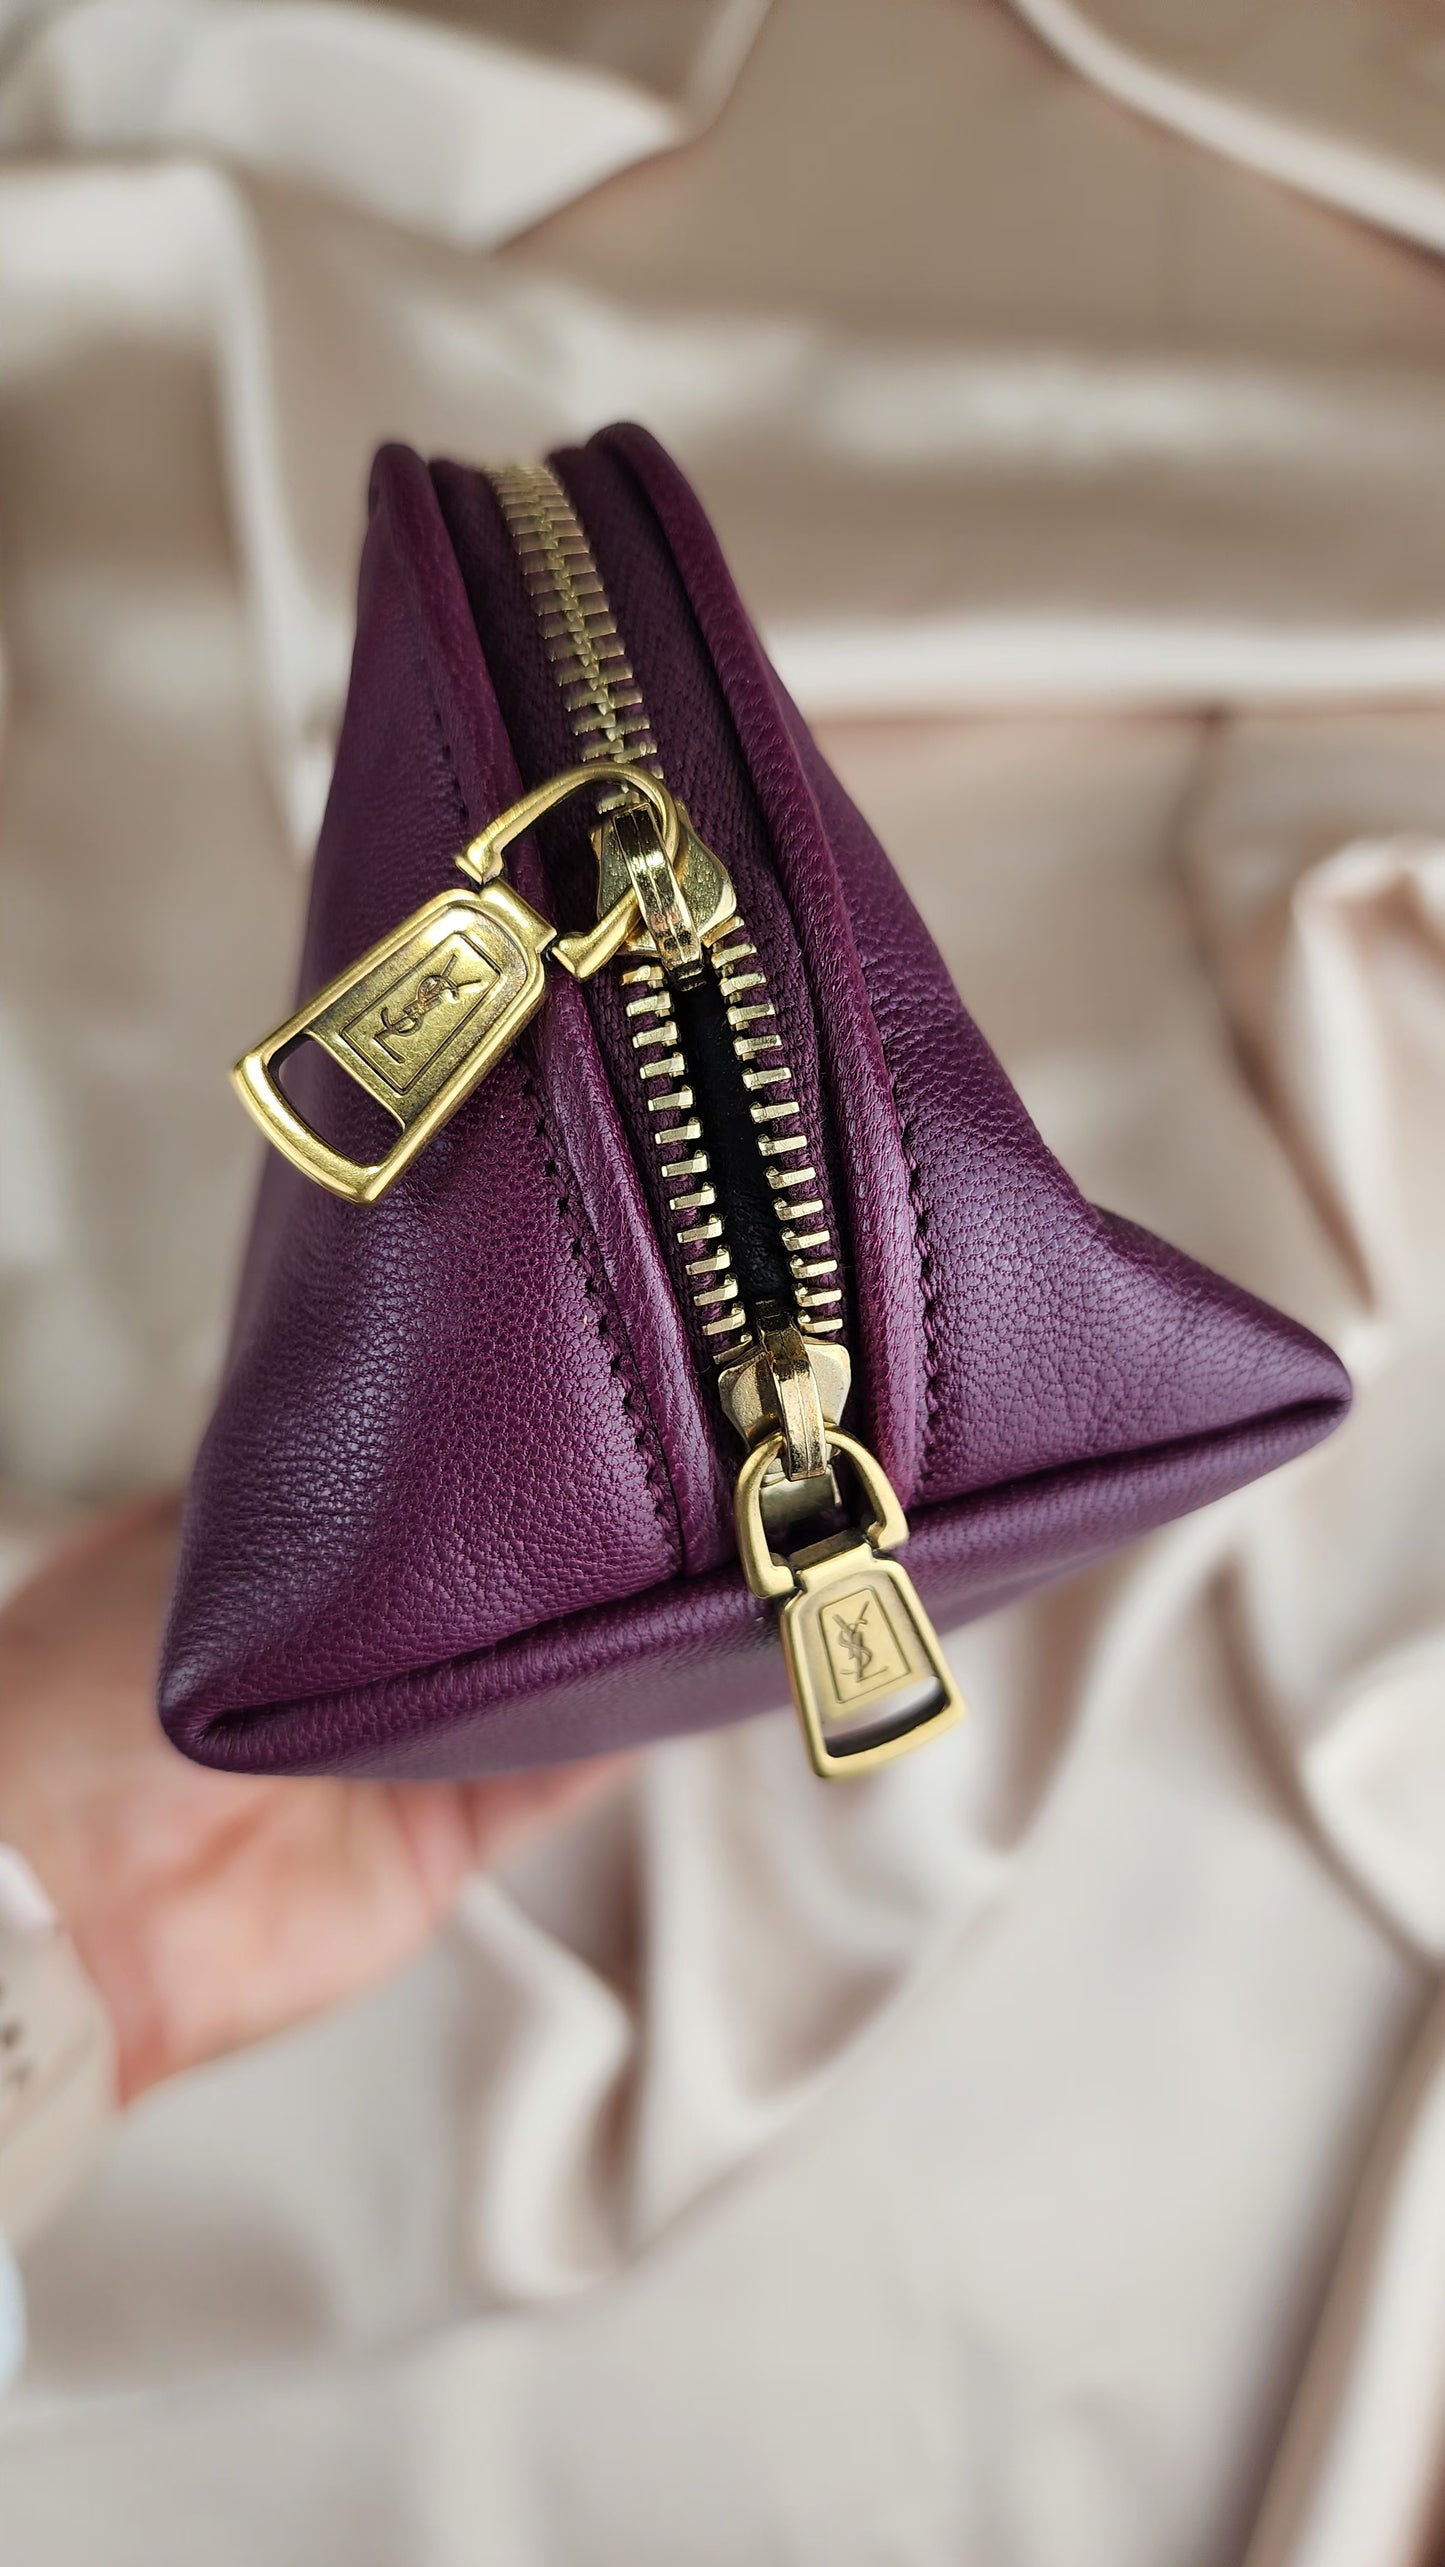 YSL Purple Leather Pouch